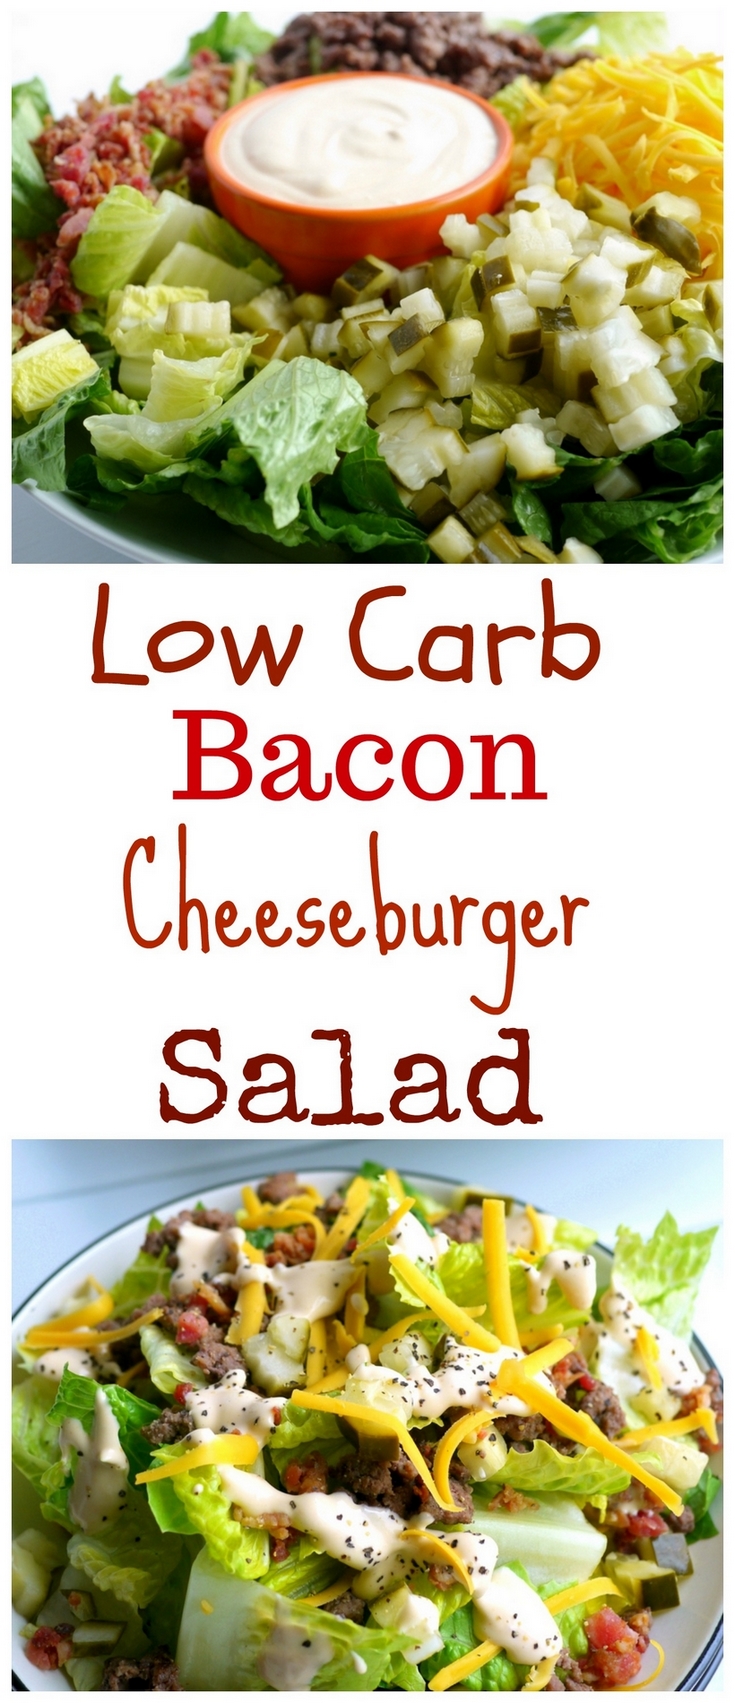 If you are trying to cut sugar out of your diet, this Low Carb Bacon Cheeseburger Salad Recipe is the perfect meal for you. Who needs the bun anyway? You'll be surprised how much this flavorful salad mimics your favorite burger. A gluten-free, keto-friendly meal that makes a healthy lunch or dinner from NoblePig.com. #noblepig #salad #keto #lowcarb #glutenfree #cheeseburger #healthyeats via @cmpollak1